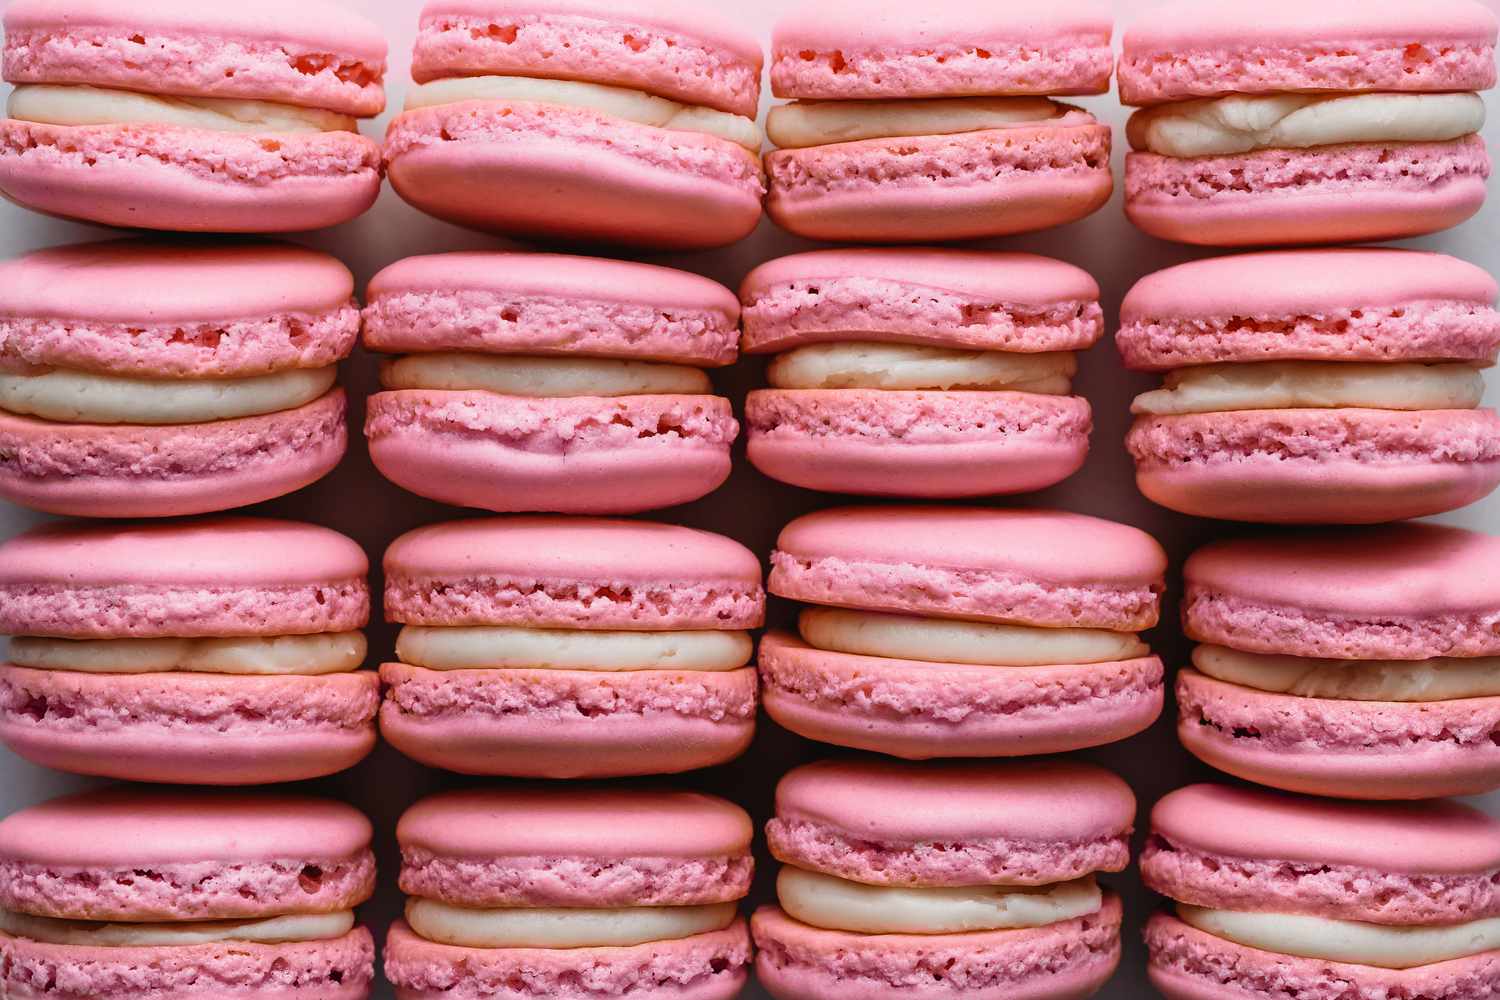 Stacks of macarons with buttercream filling